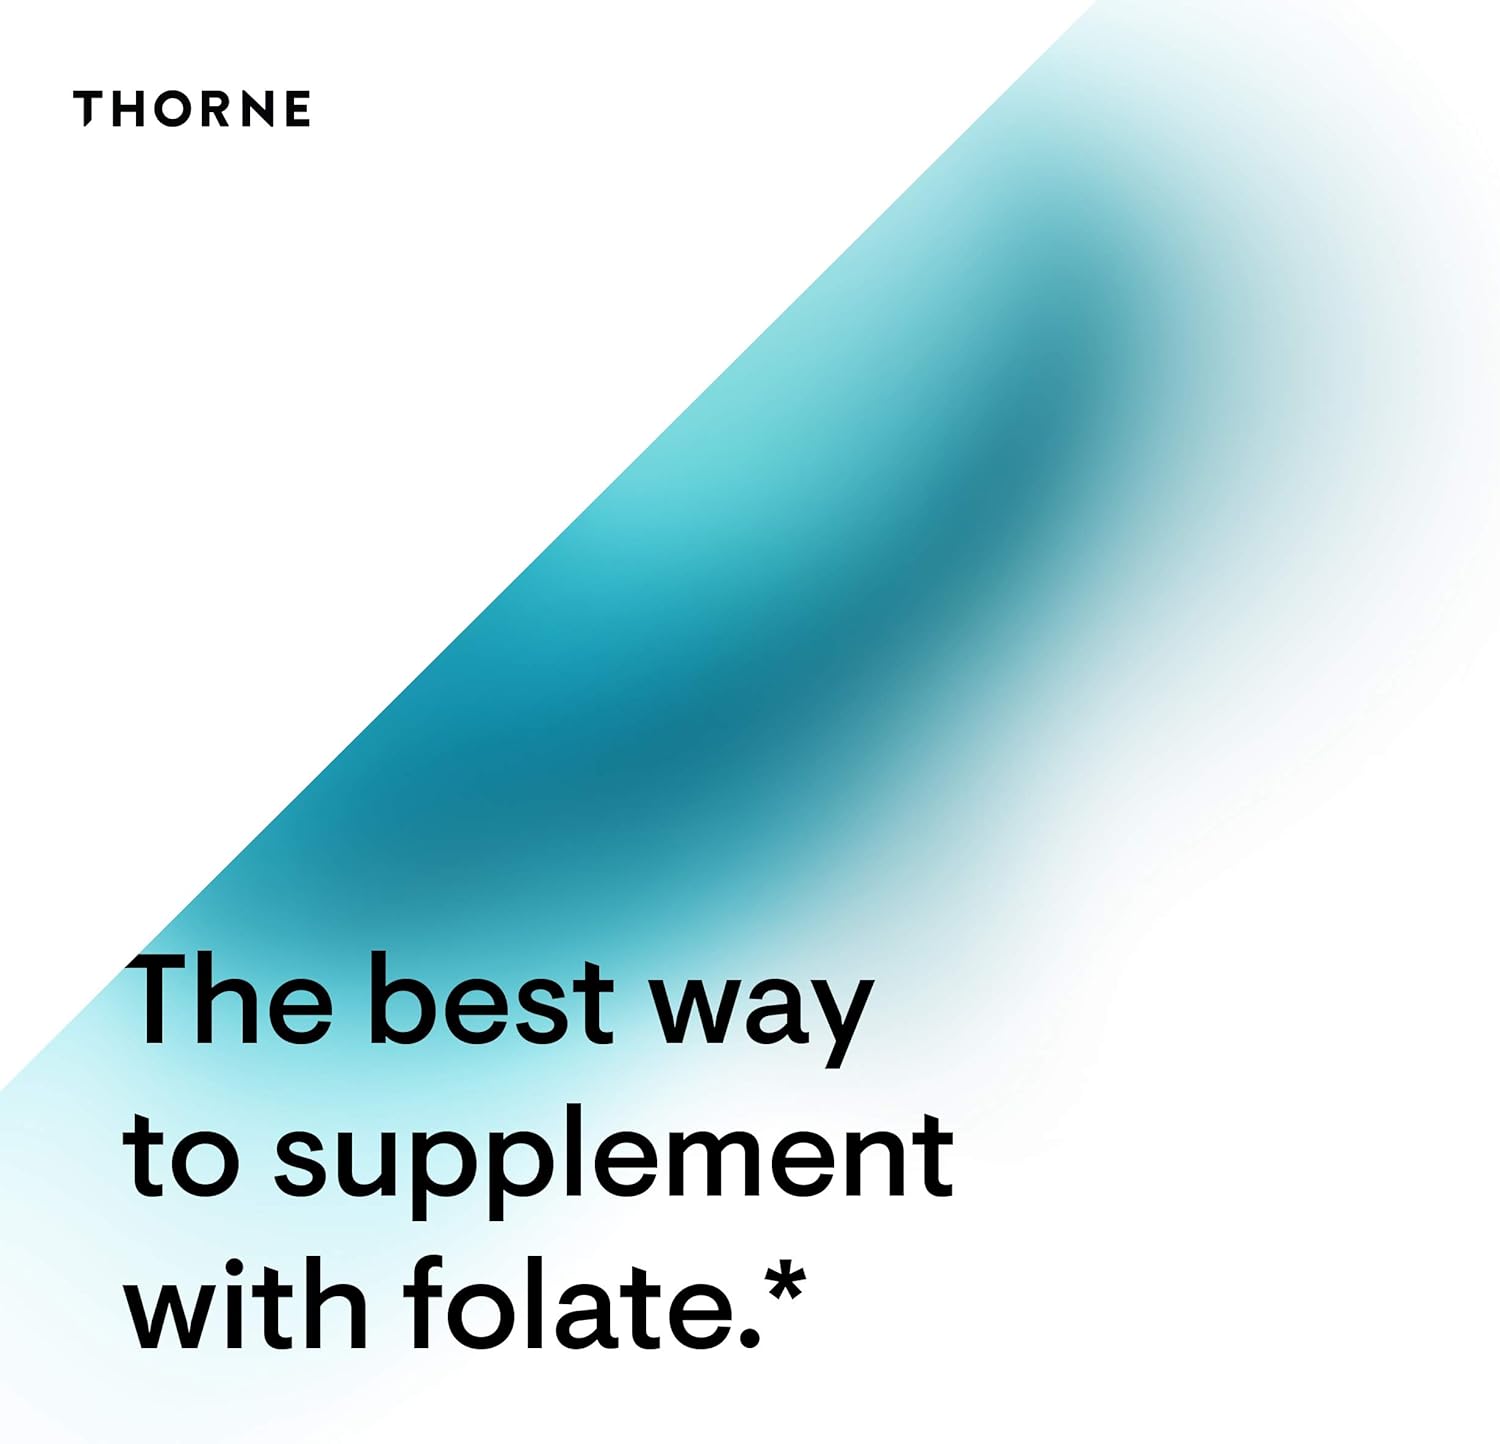 Thorne 5-MTHF 1mg - Methylfolate (Active B9 Folate) Supplement - Suppo